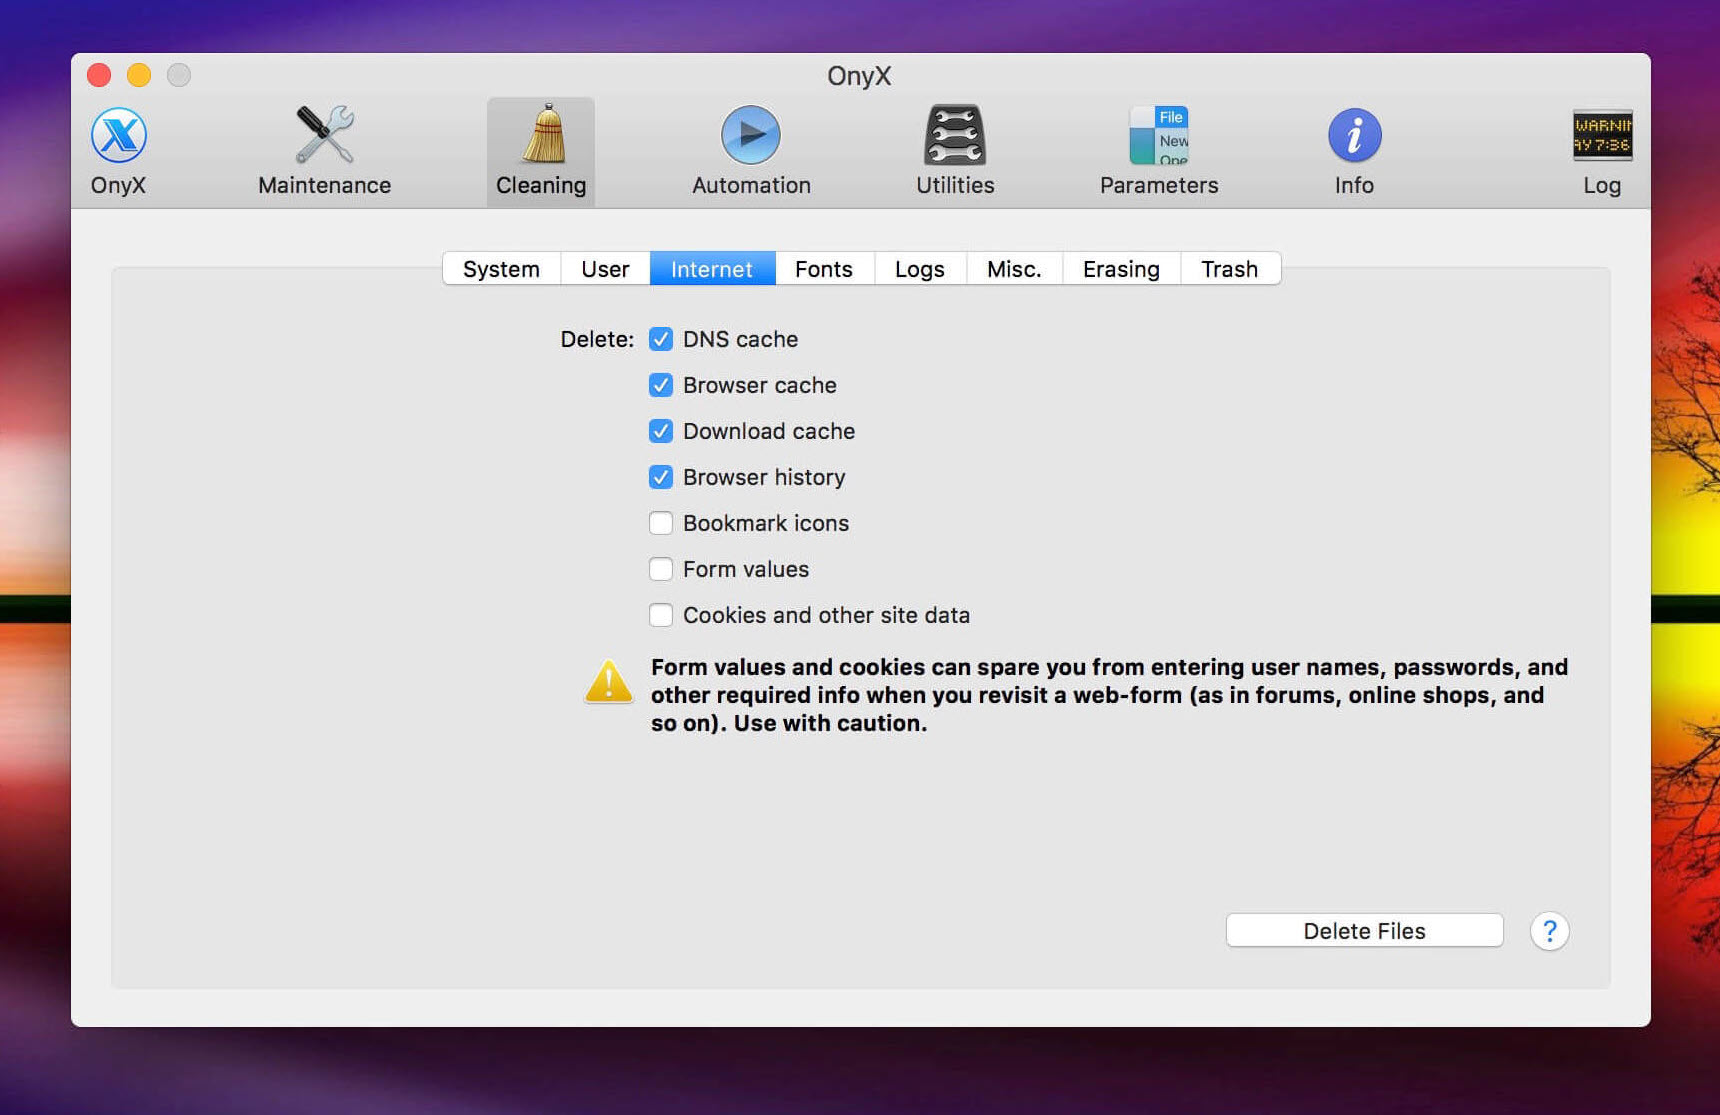 mac system cleaner free